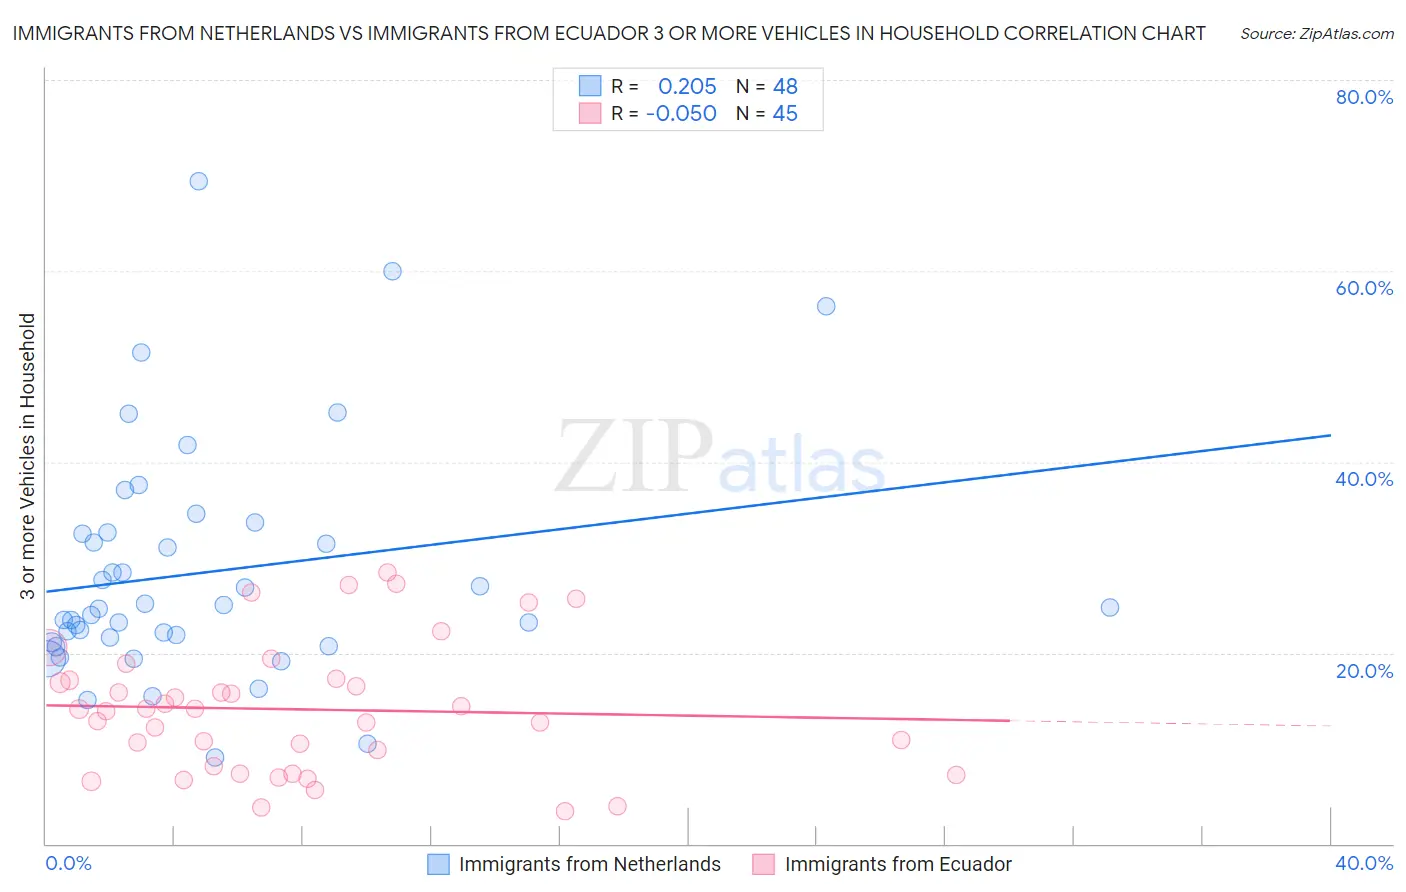 Immigrants from Netherlands vs Immigrants from Ecuador 3 or more Vehicles in Household